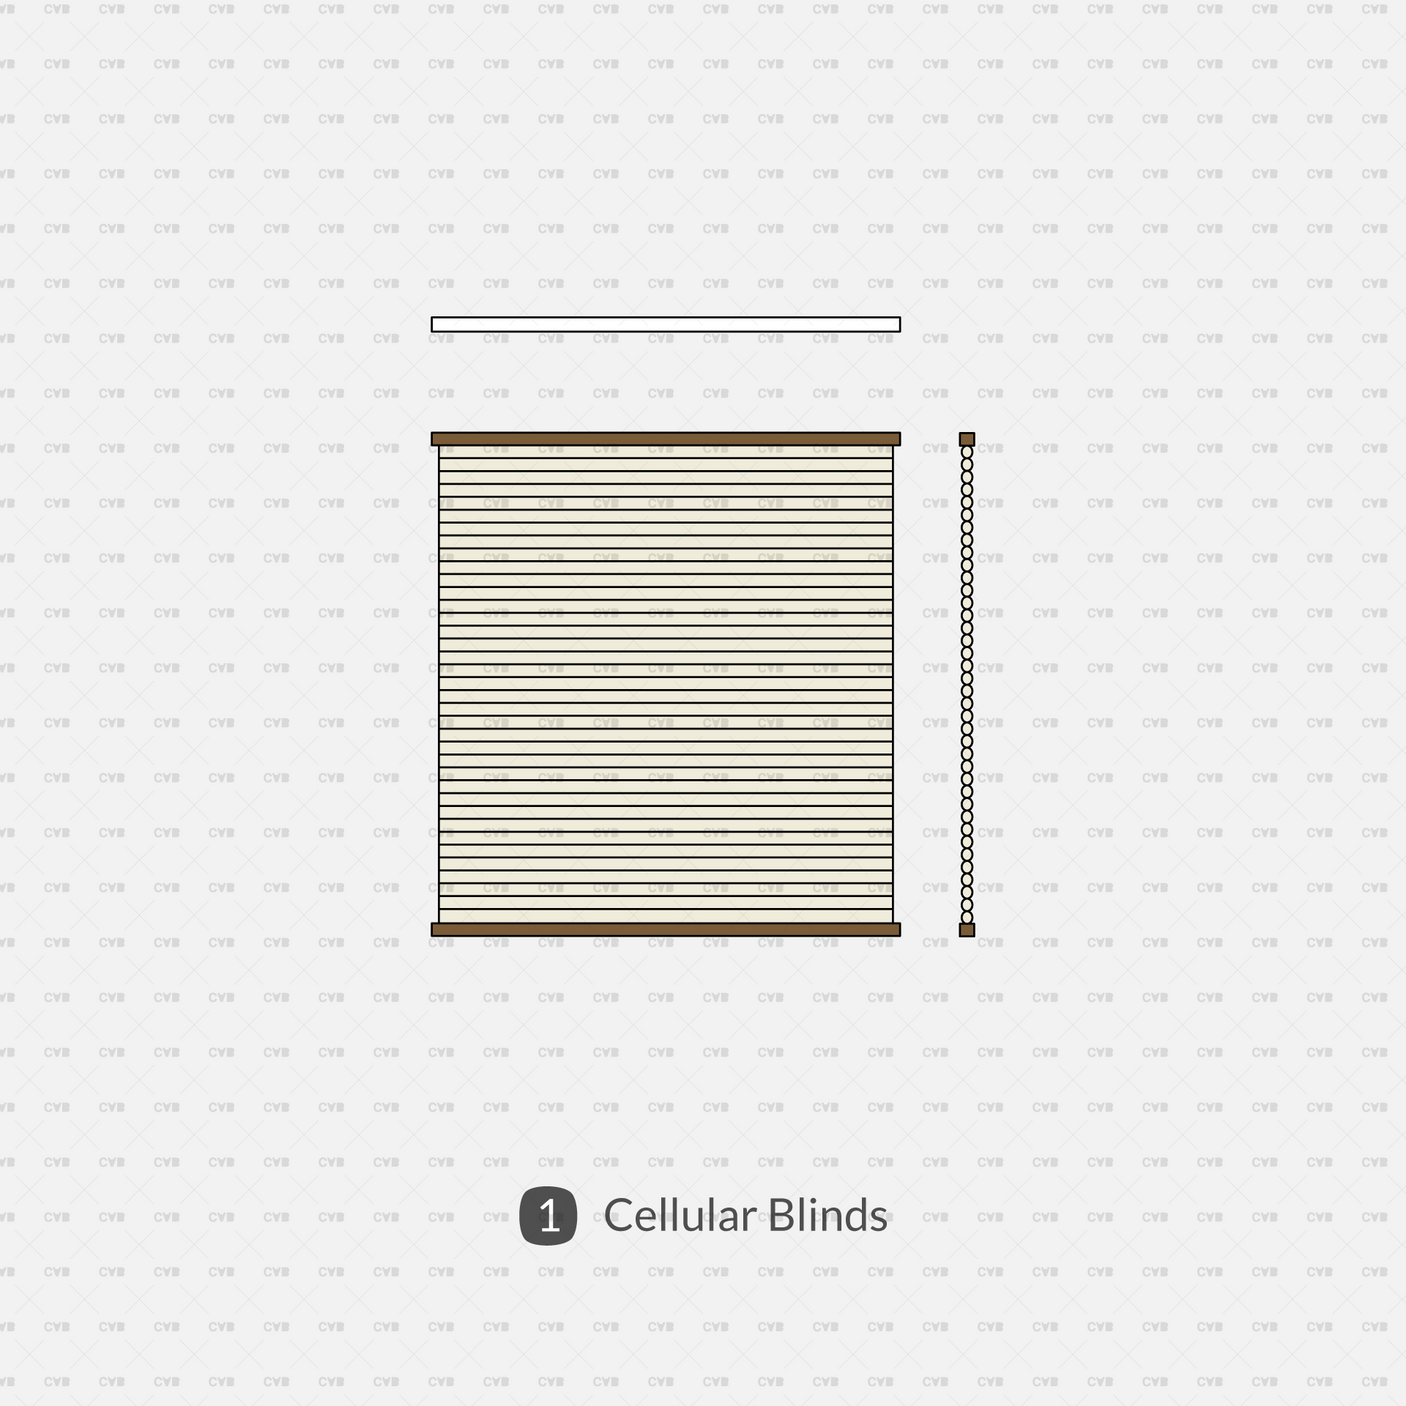 CAD Blinds and Curtains